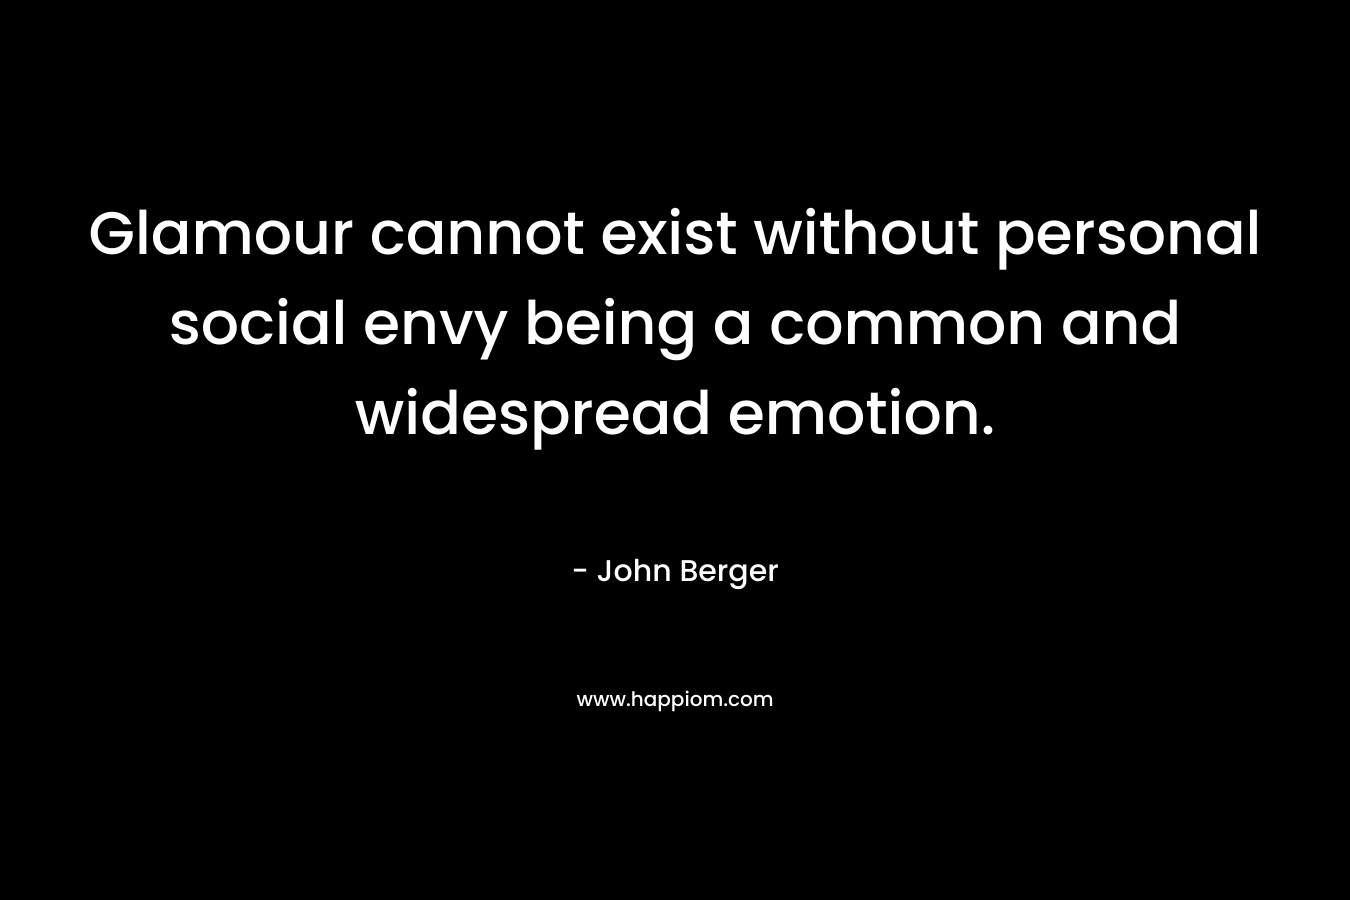 Glamour cannot exist without personal social envy being a common and widespread emotion. – John Berger